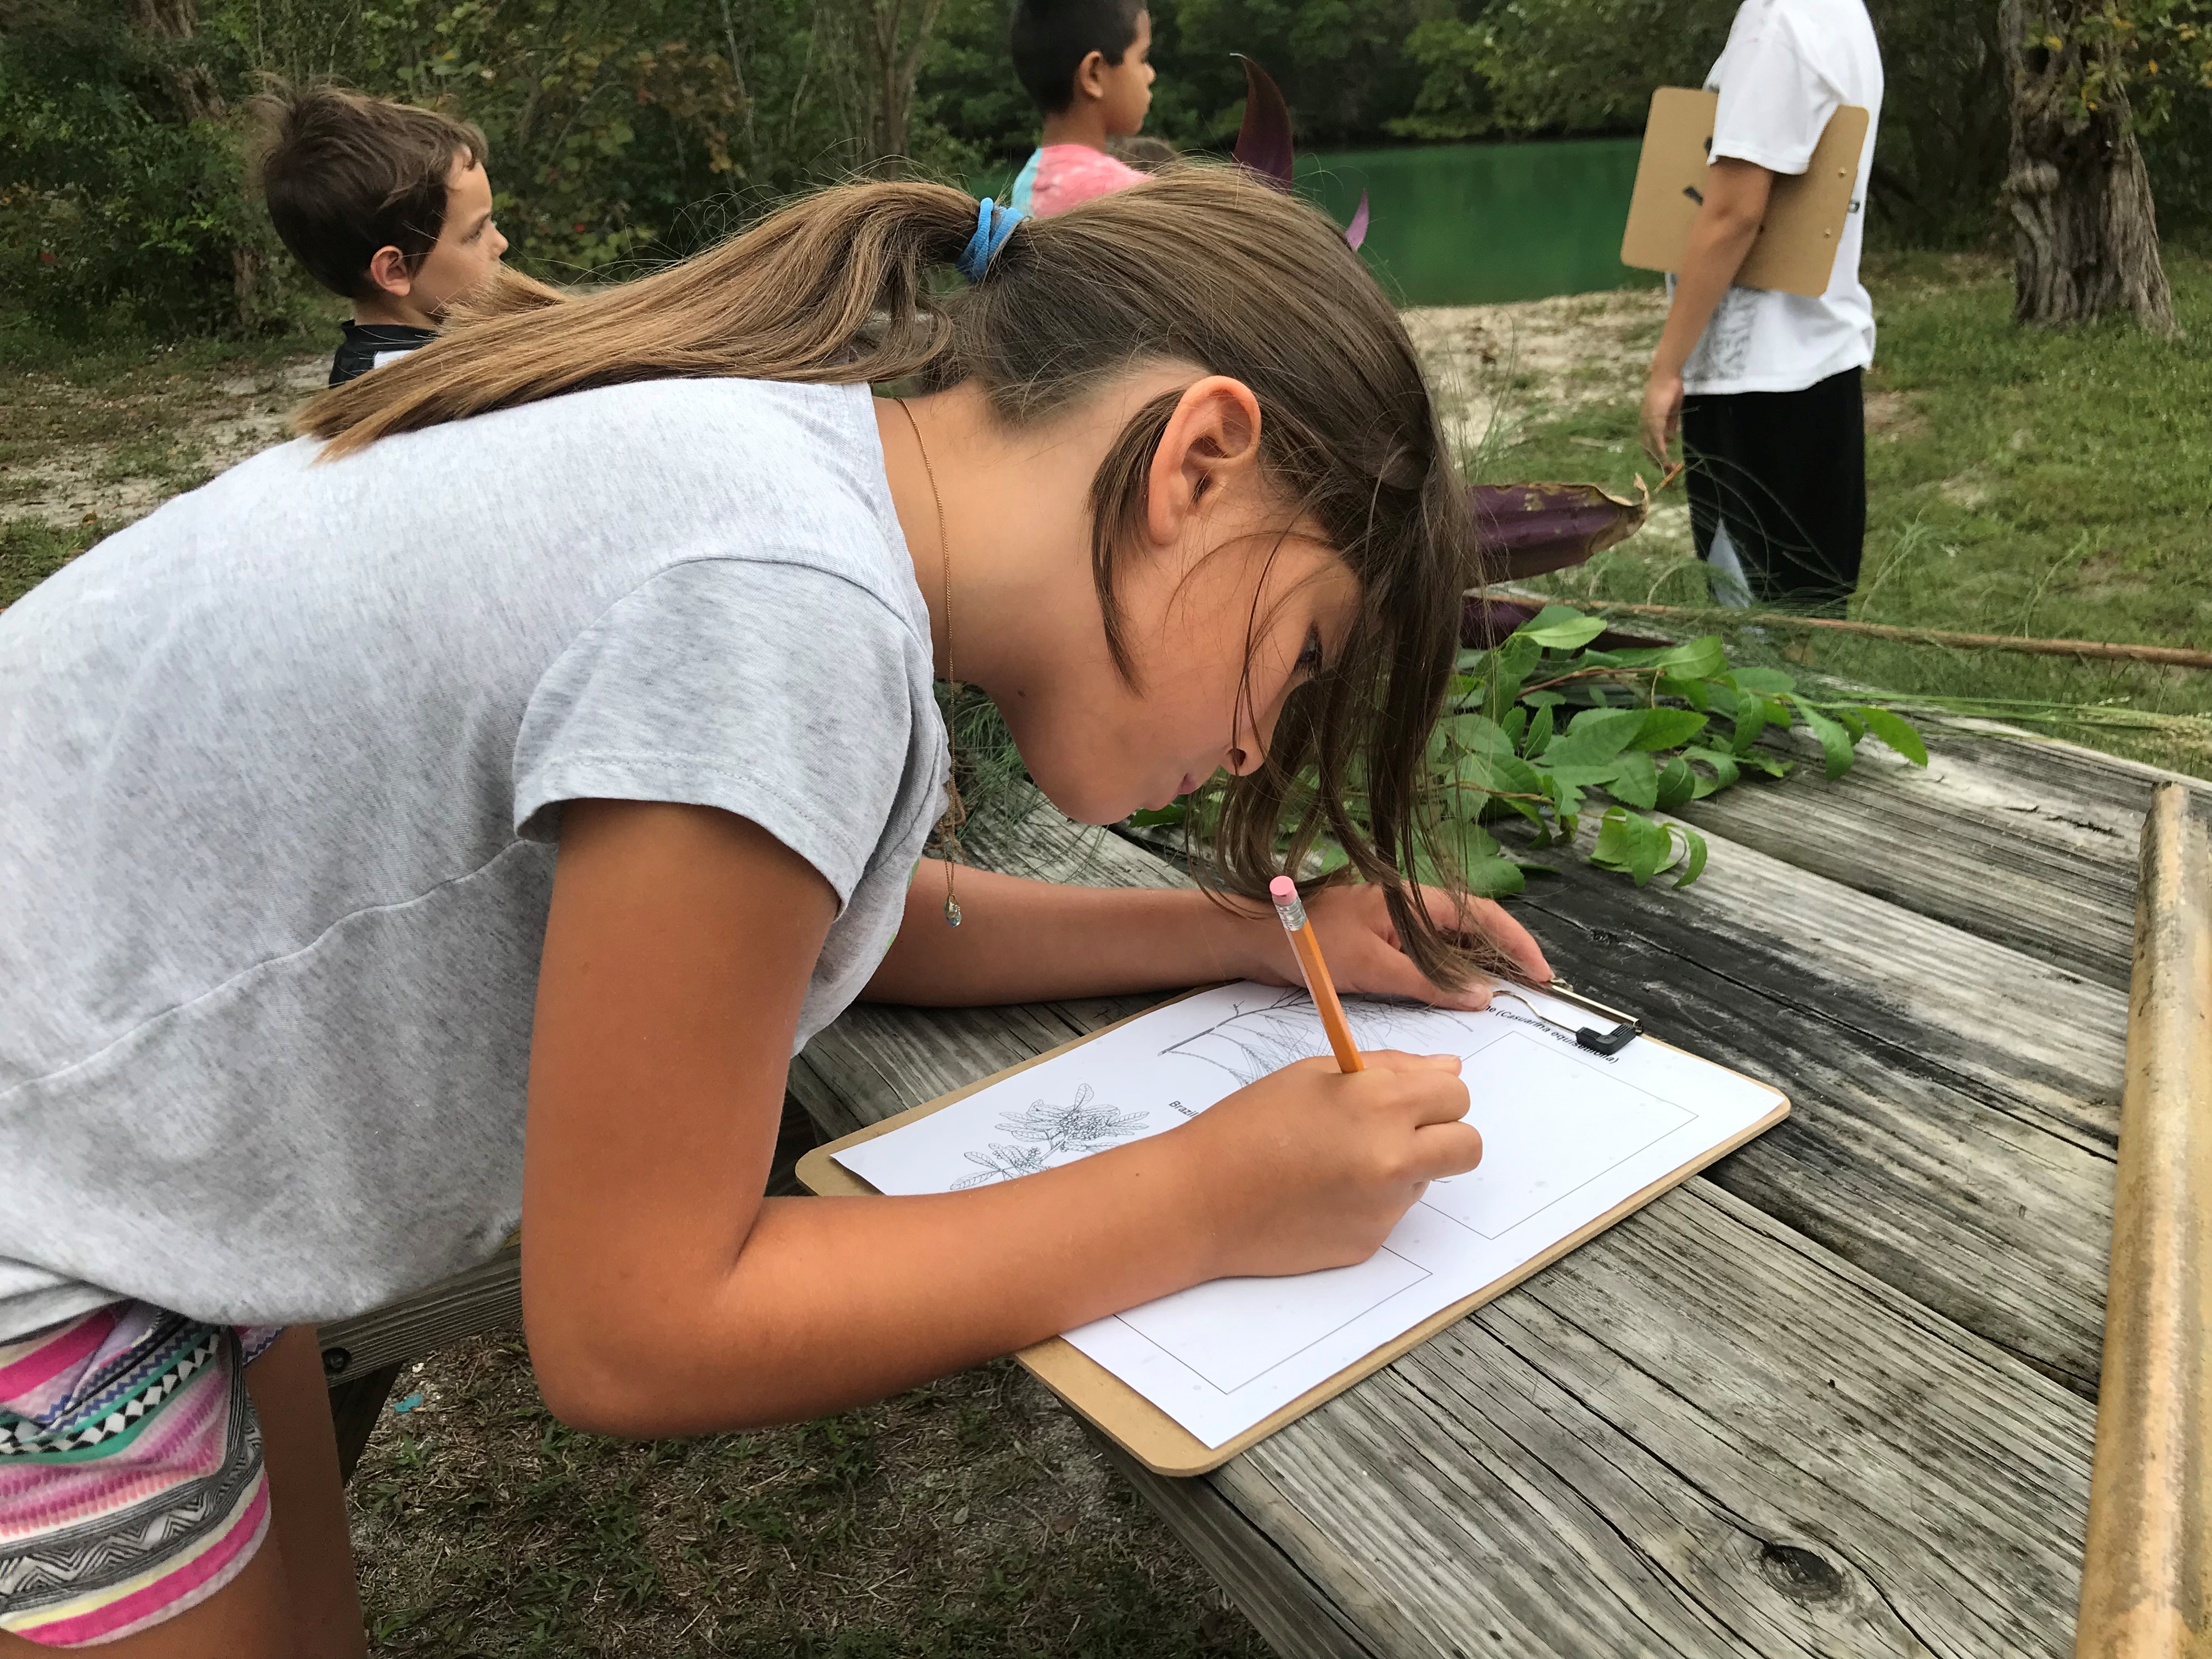 A young visitor logging observations at a Florida state park